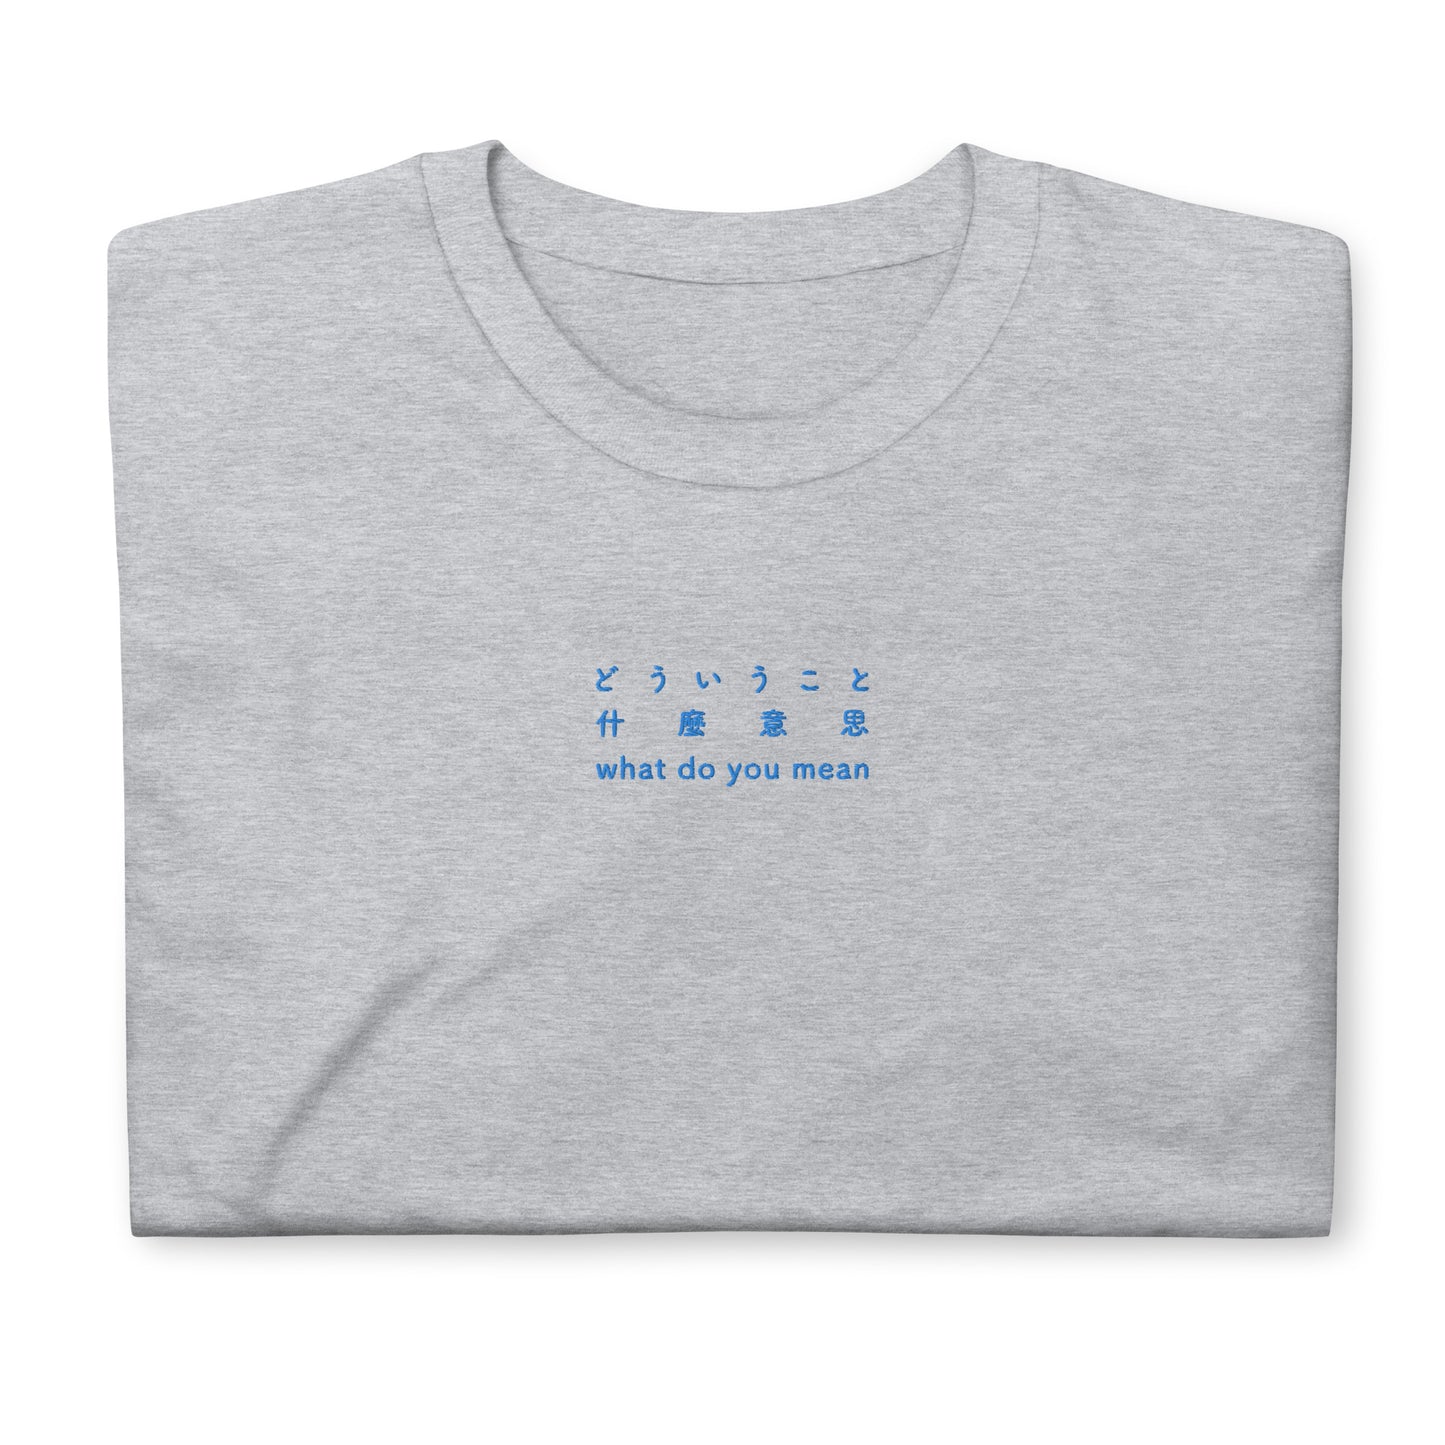 Light Gray High Quality Tee - Front Design with an Blue Embroidery "What Do You Mean" in Japanese, Chinese and English